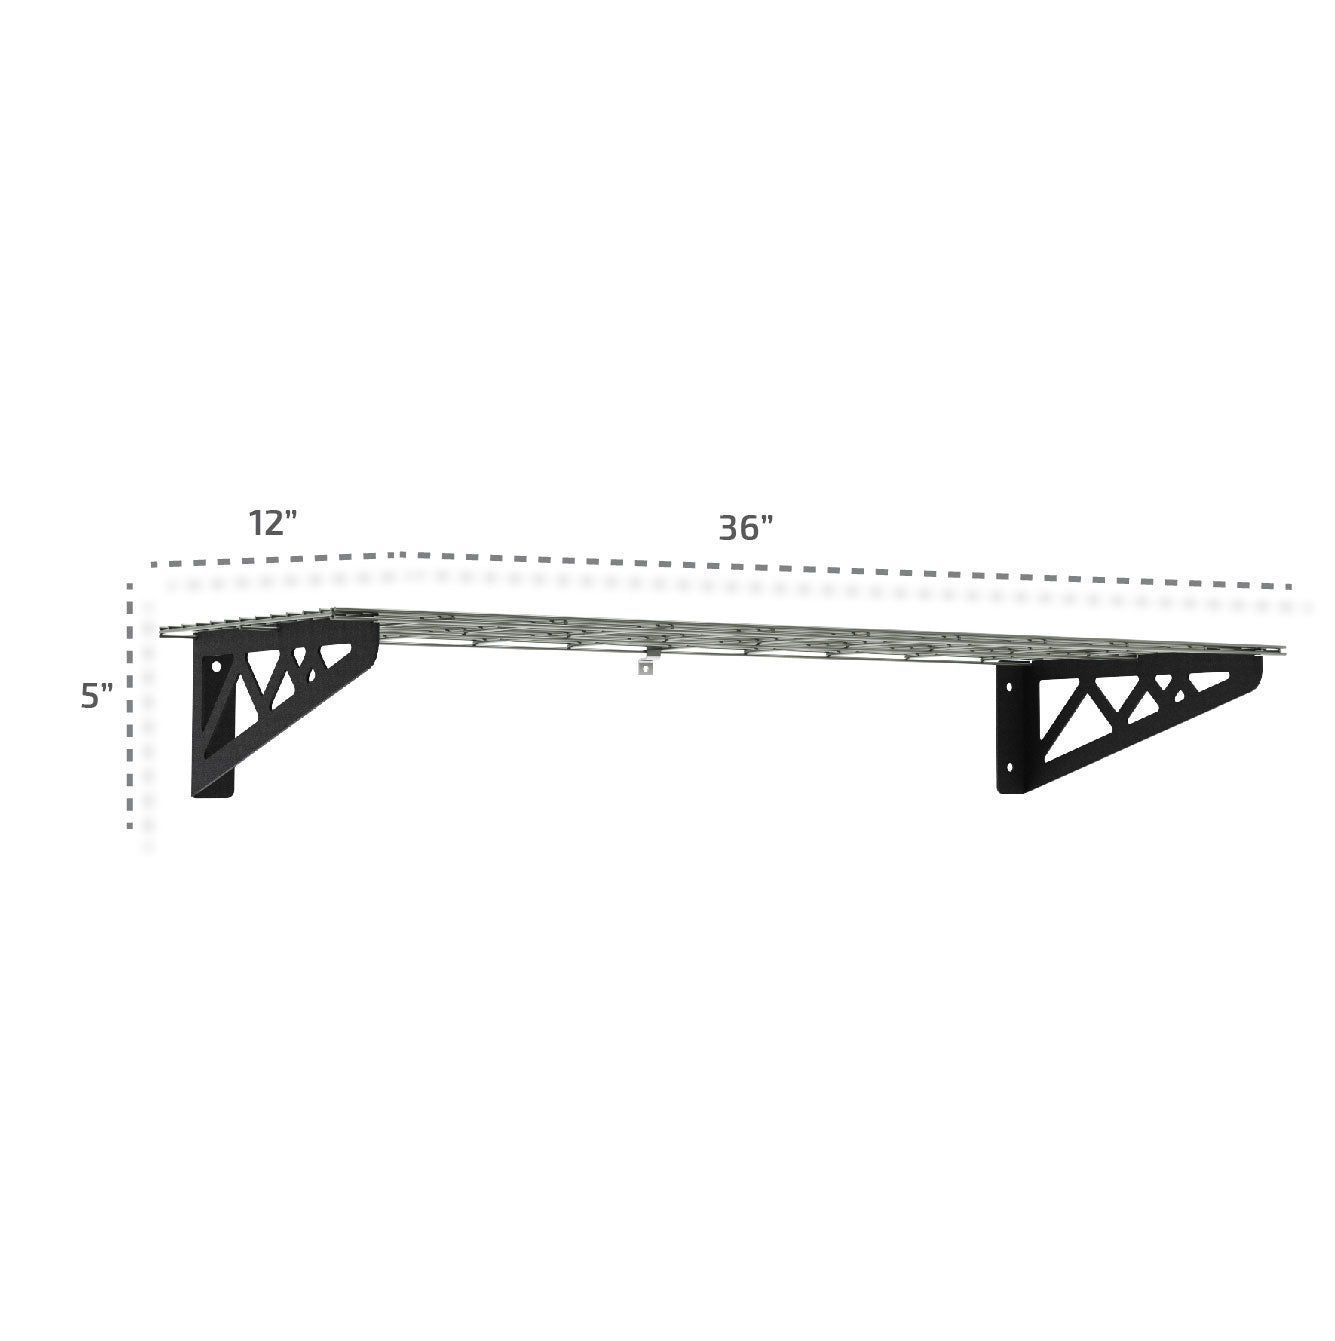 12’ x 36’ Wall Shelves (Two Pack with Hooks) - Mounted